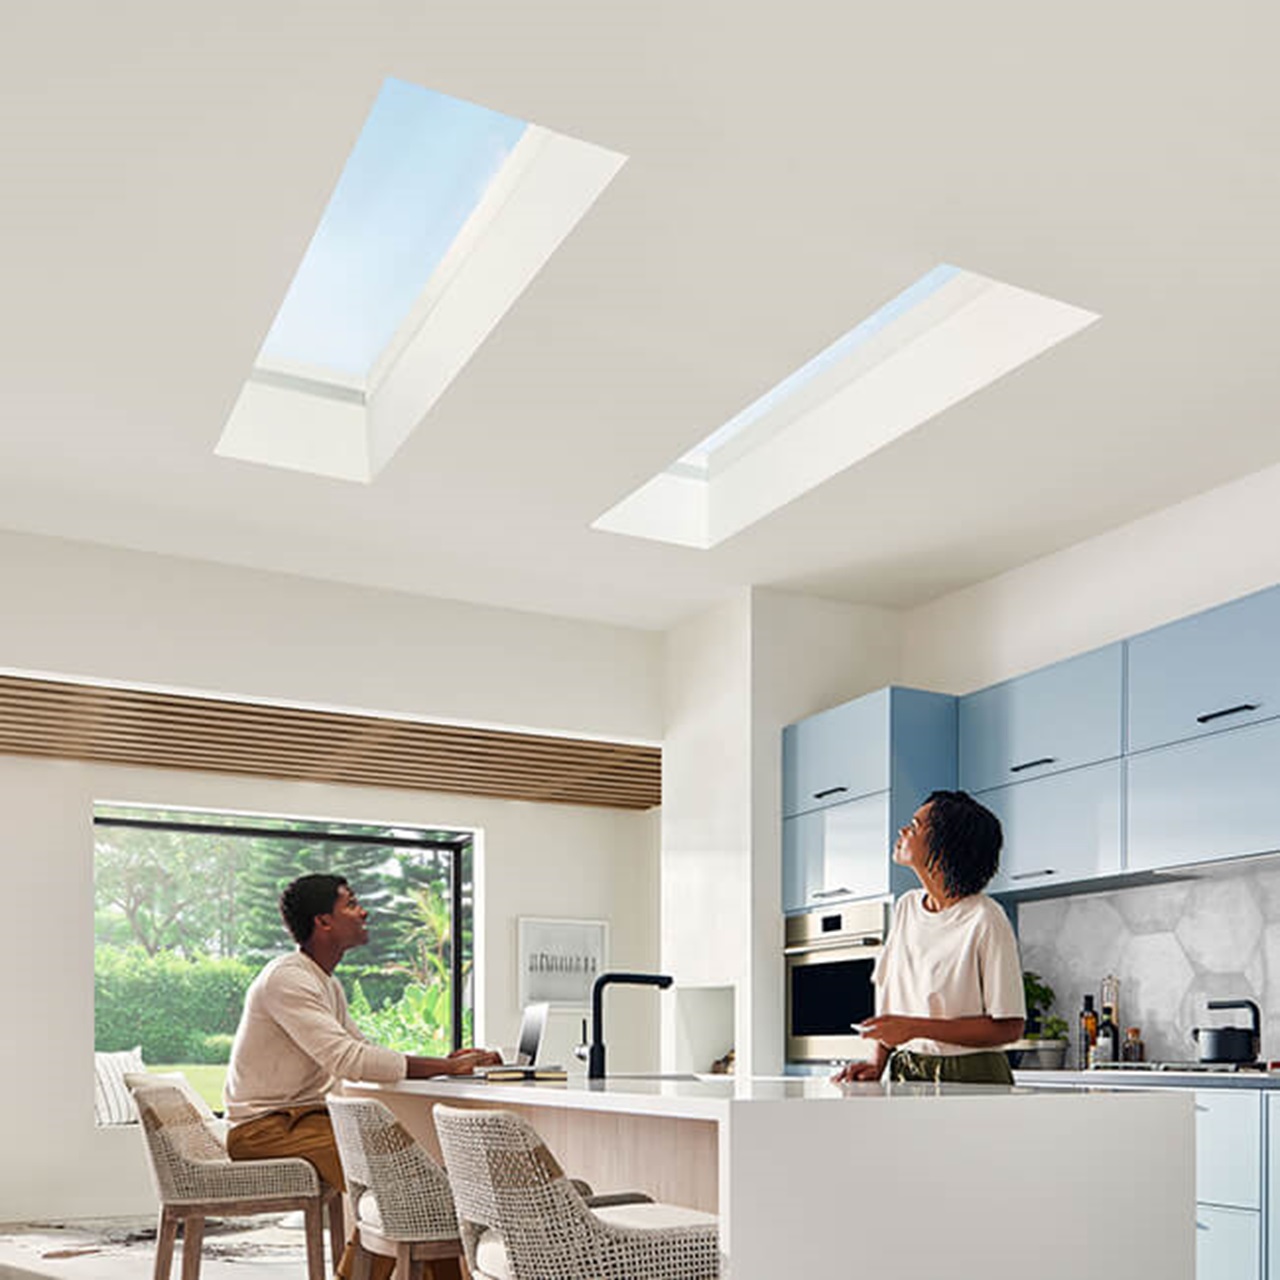 Interior of home with two people in Kitchen with Marvin Skycove window box and Marvin Awaken Skylights